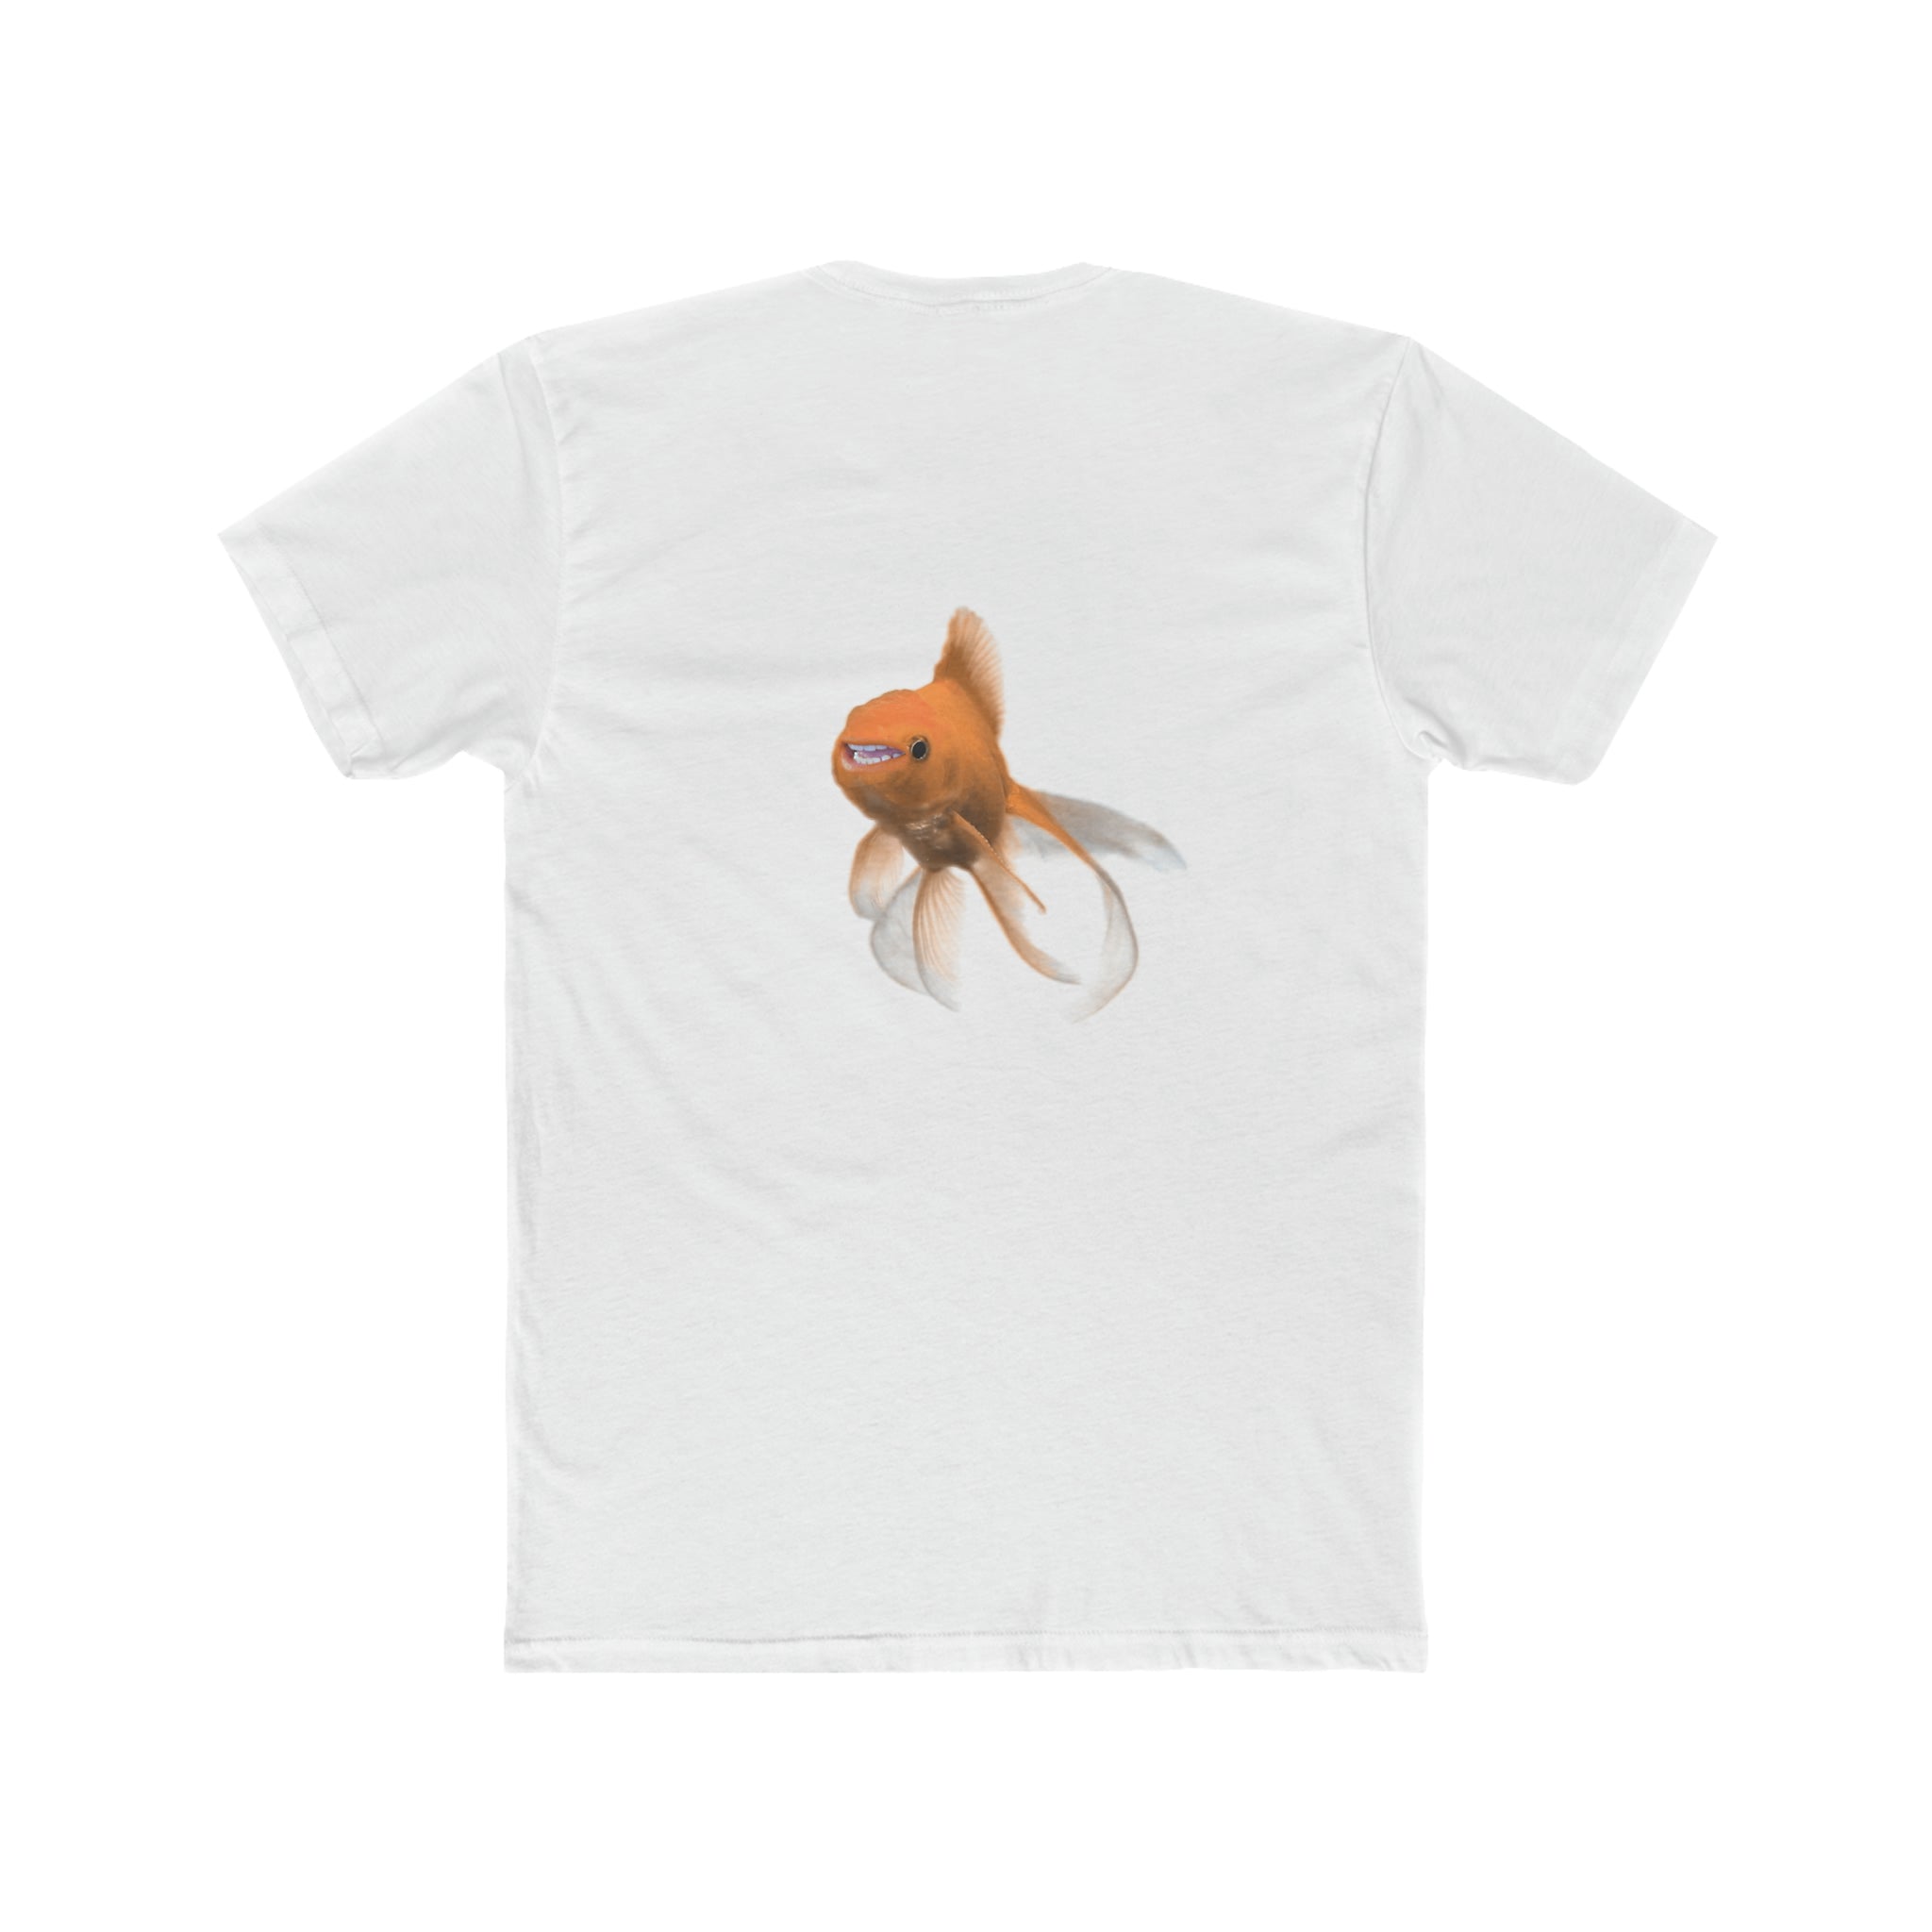 Hecklefish on the Back Cotton Crew Tee